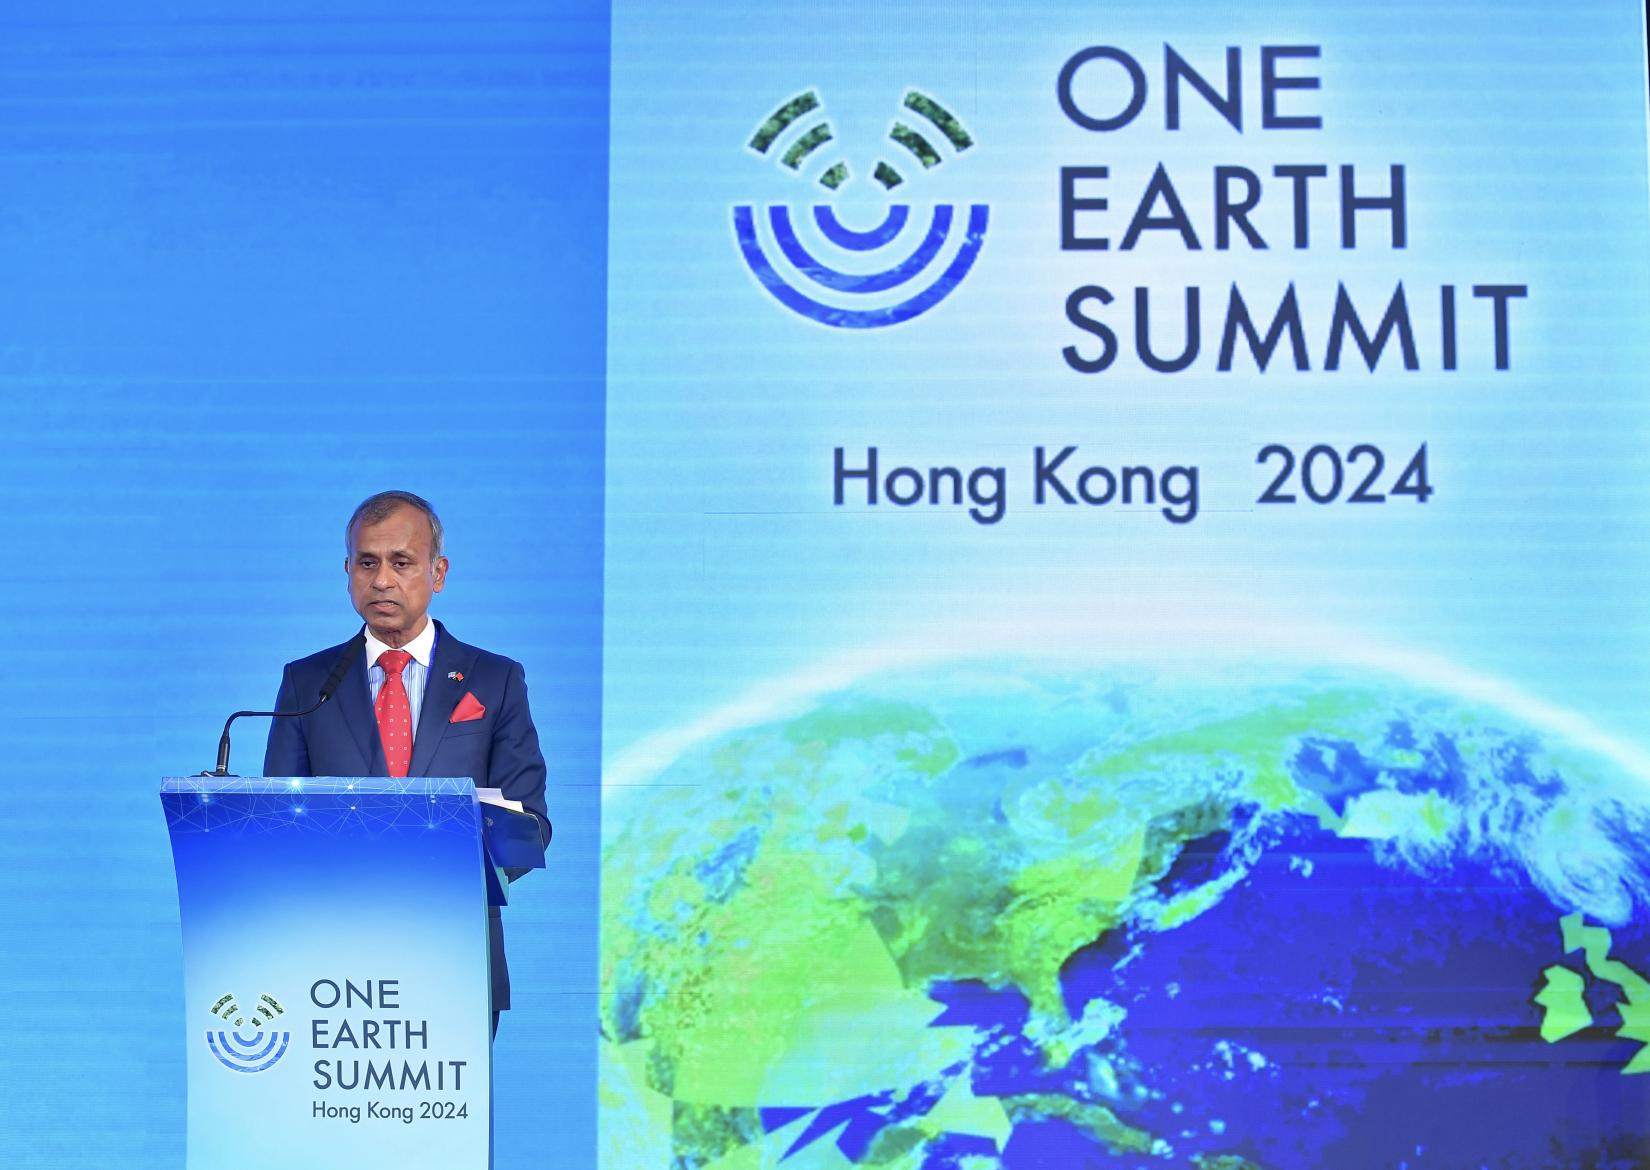 UN Resident Coordinator in China Siddharth Chatterjee at One Earth Summit 2024